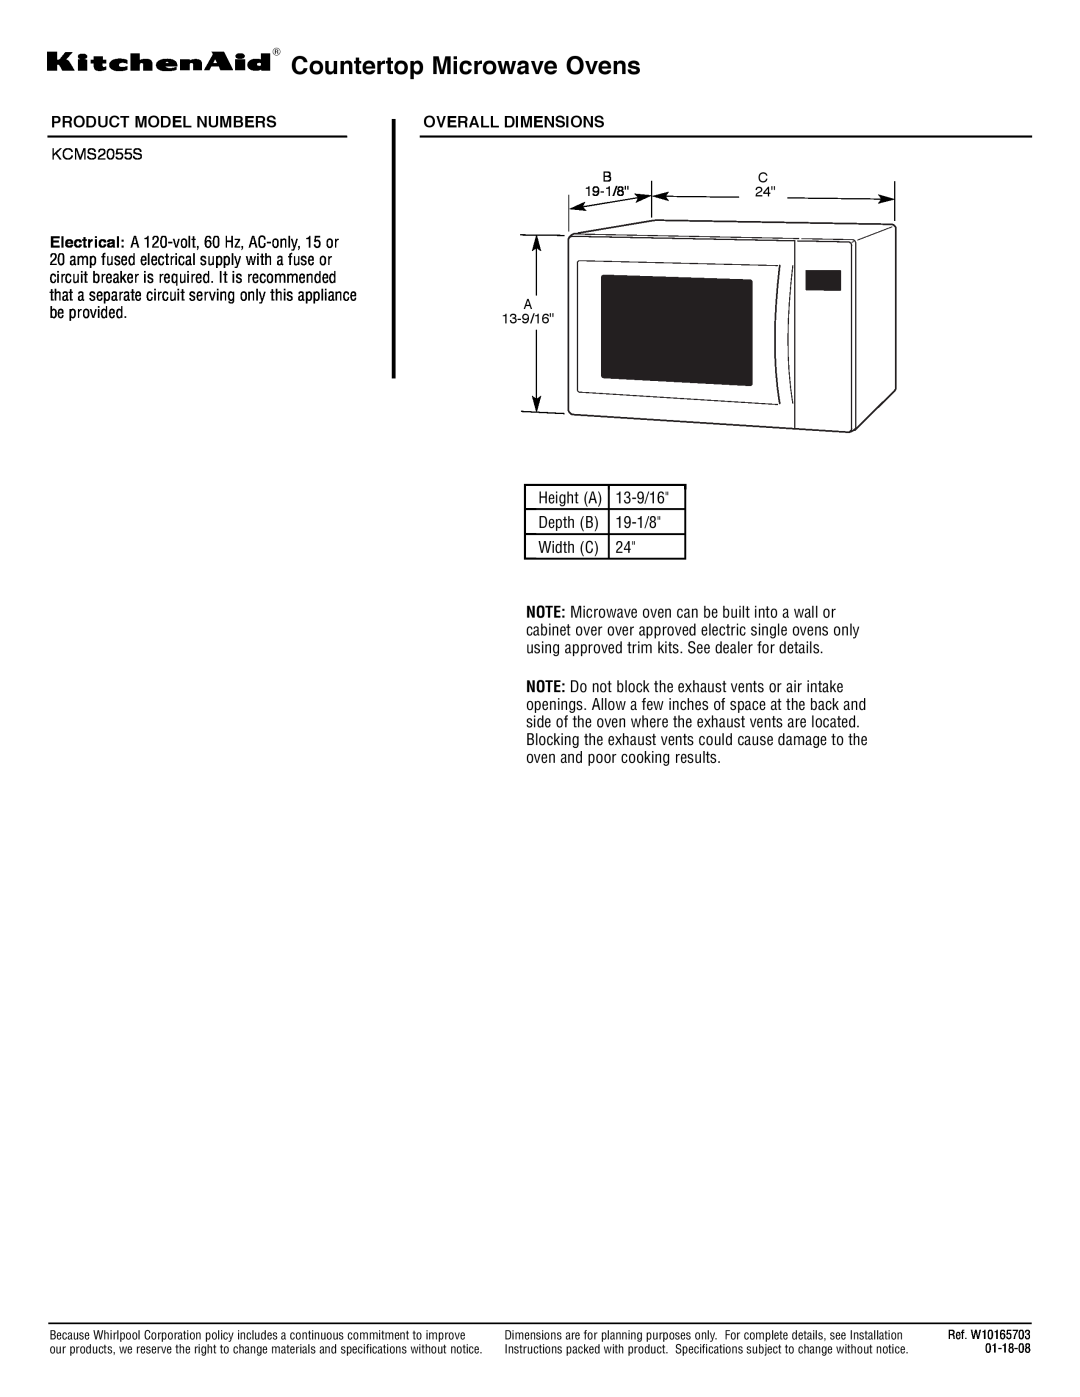 KitchenAid KCMS2055S dimensions Countertop Microwave Ovens, Product Model Numbers, Overall Dimensions, Depth B, 19-1/8 